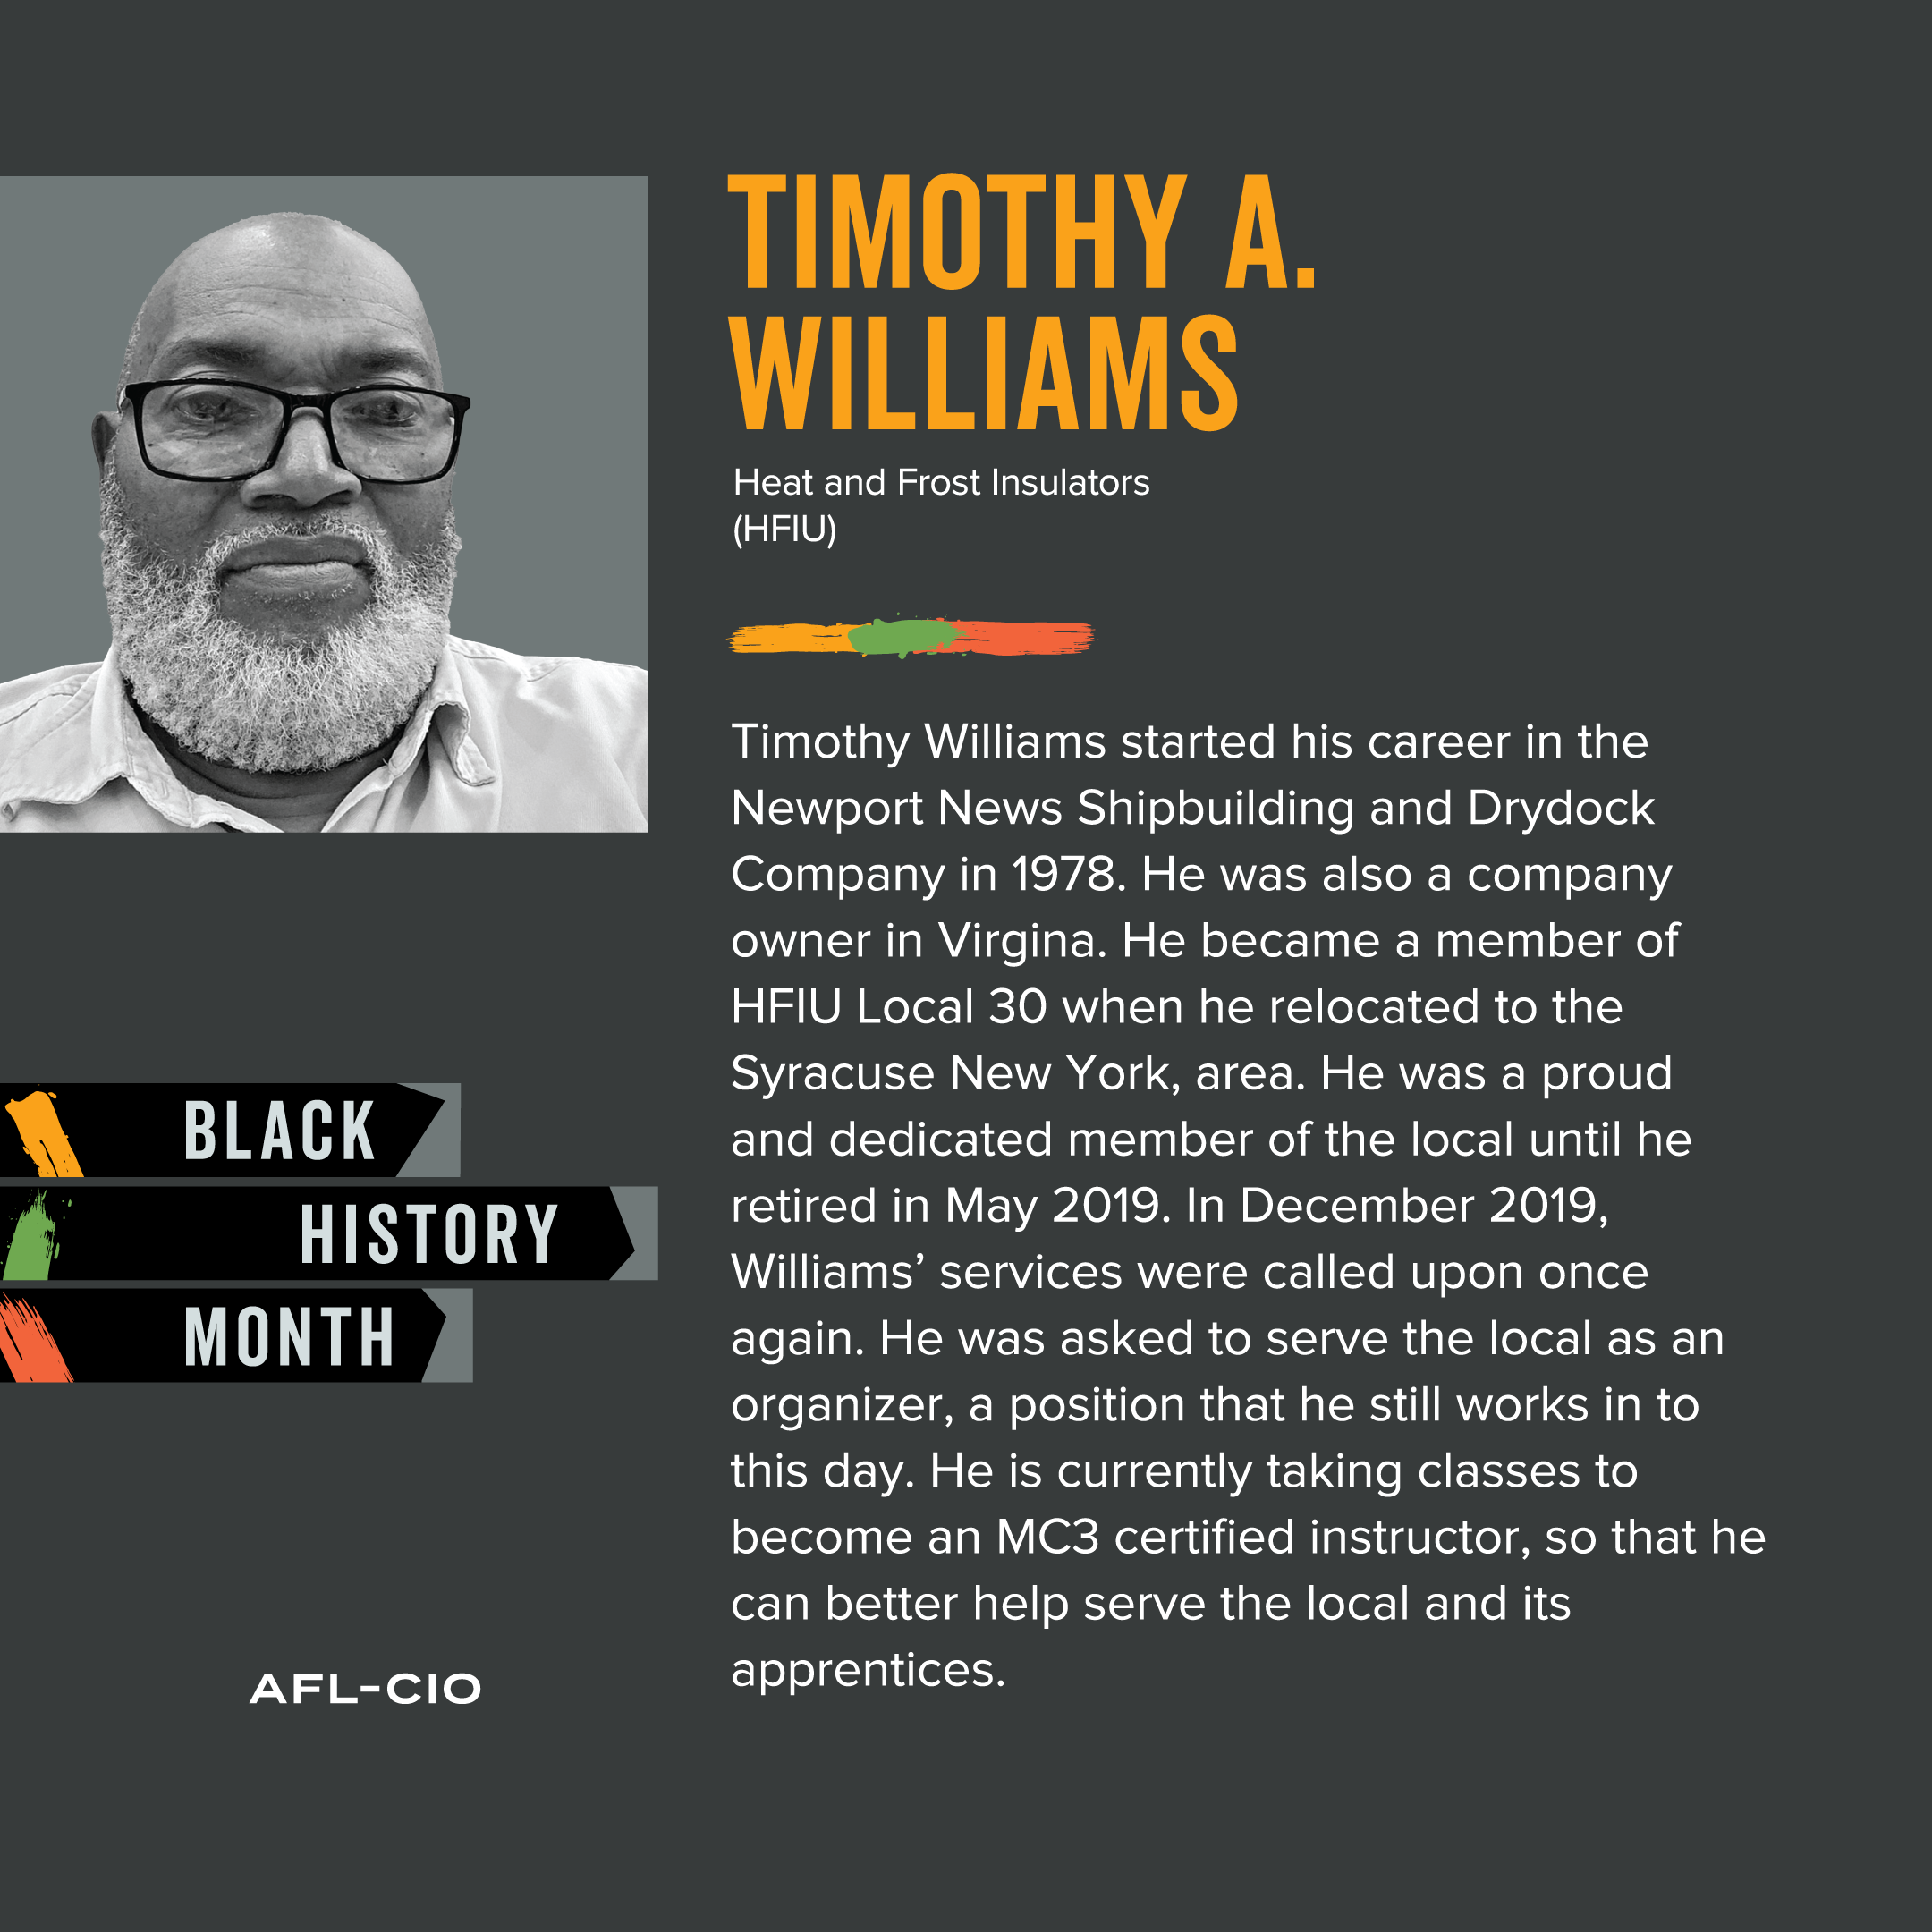 Timothy A. Williams